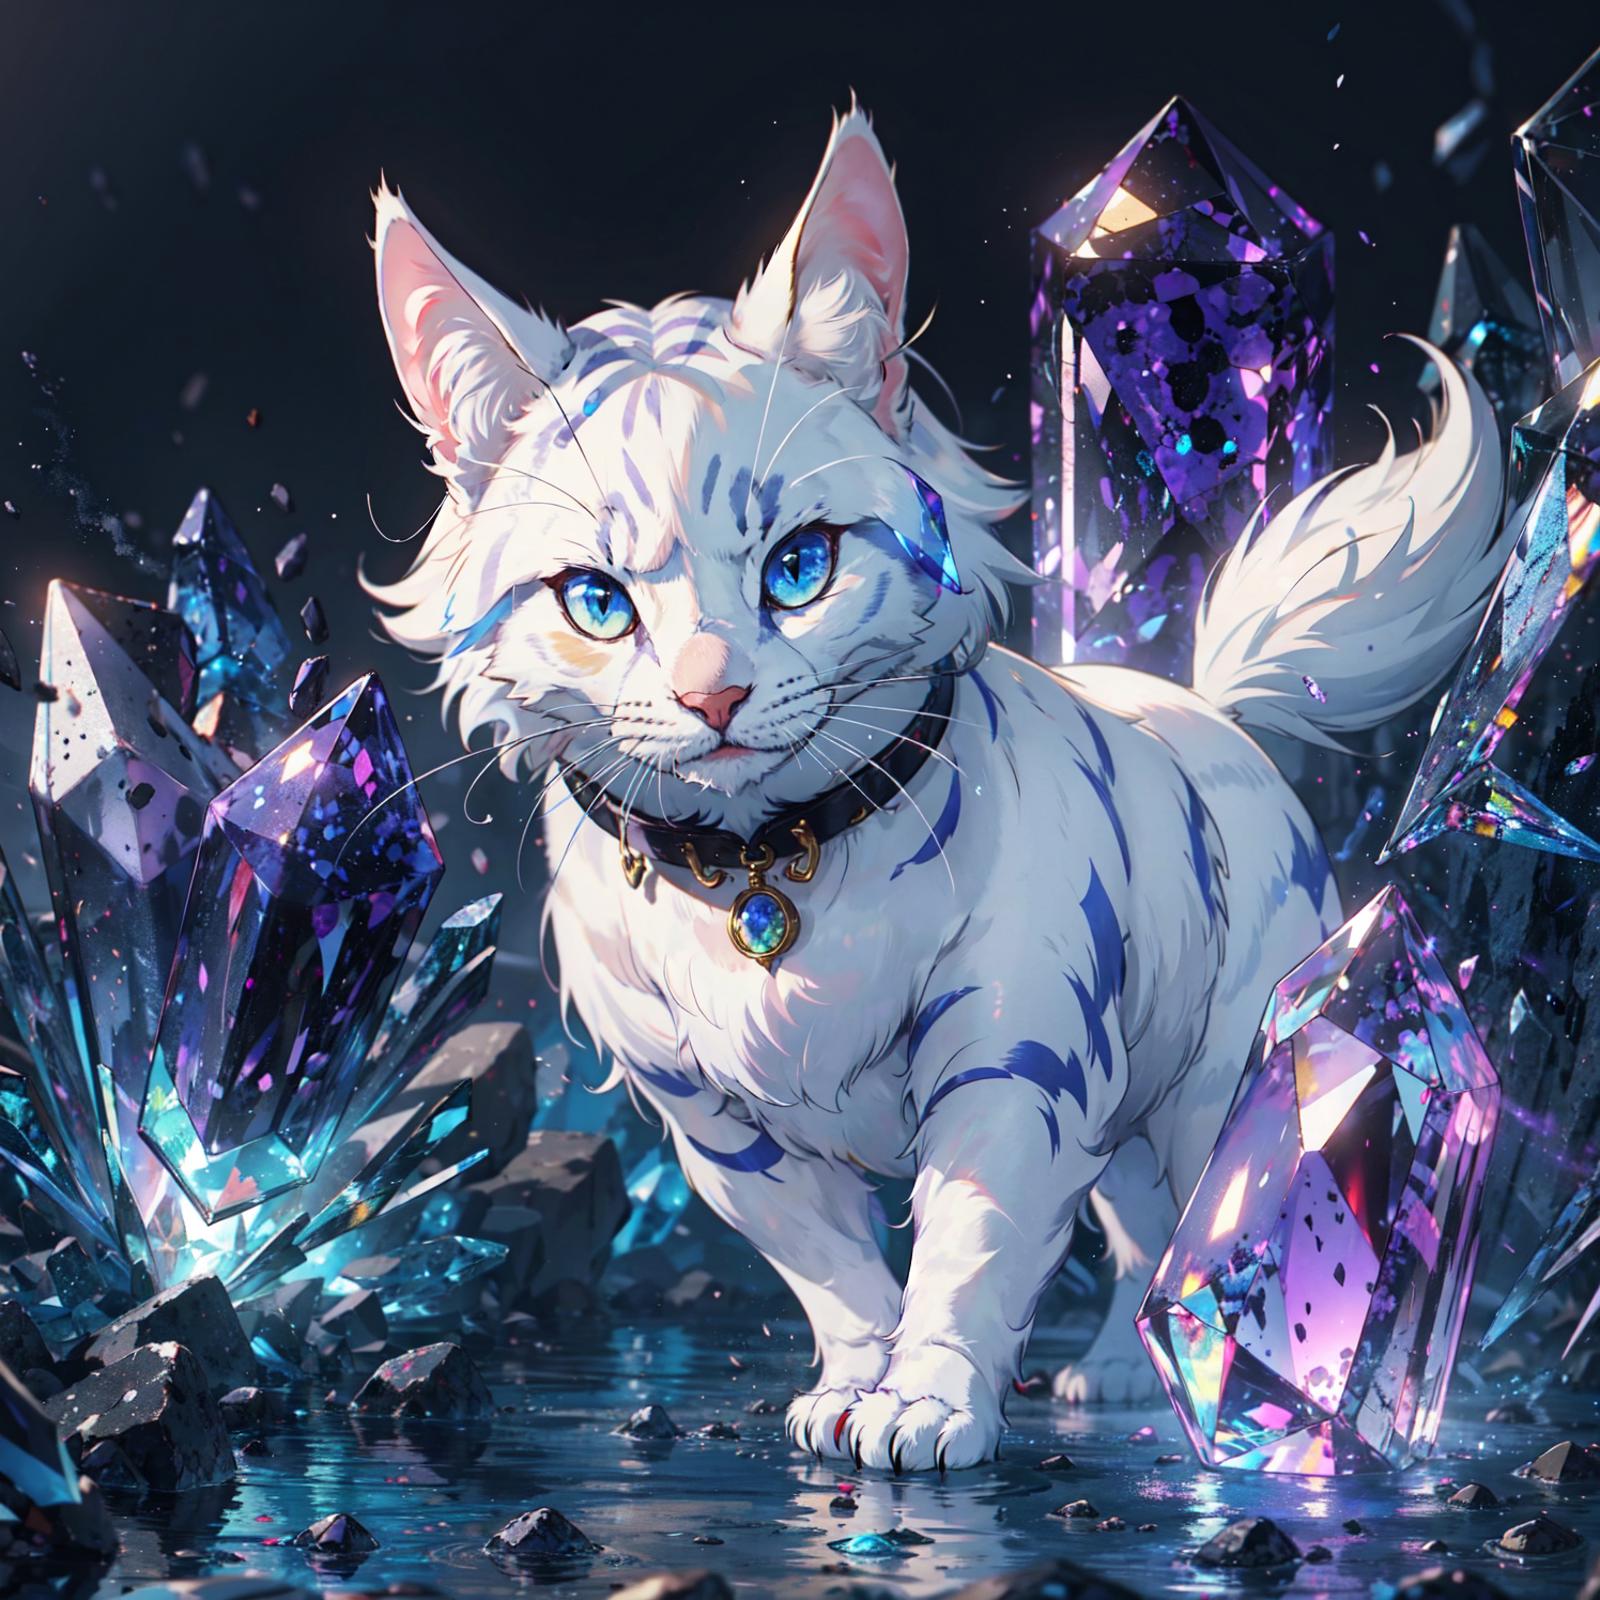 A white and blue cat standing in a field of crystals.